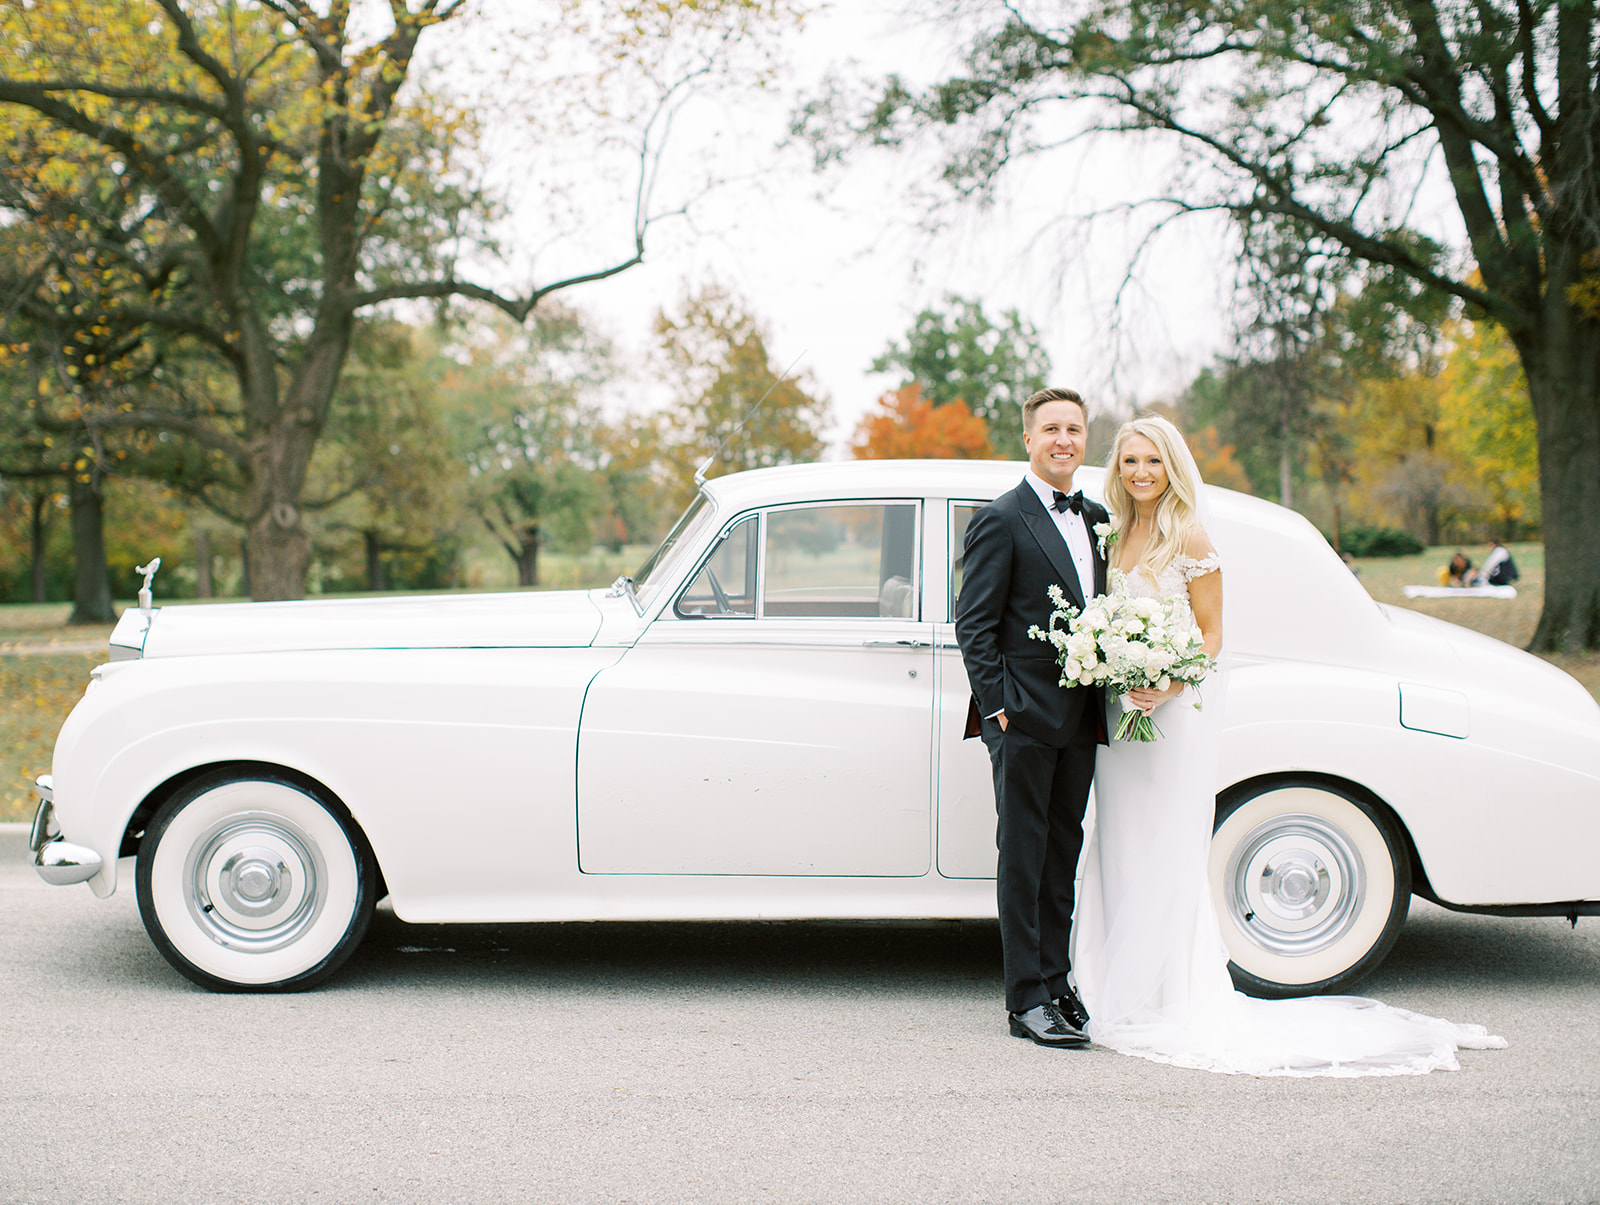 Bride and groom in front of classic car at Ritz Charles wedding